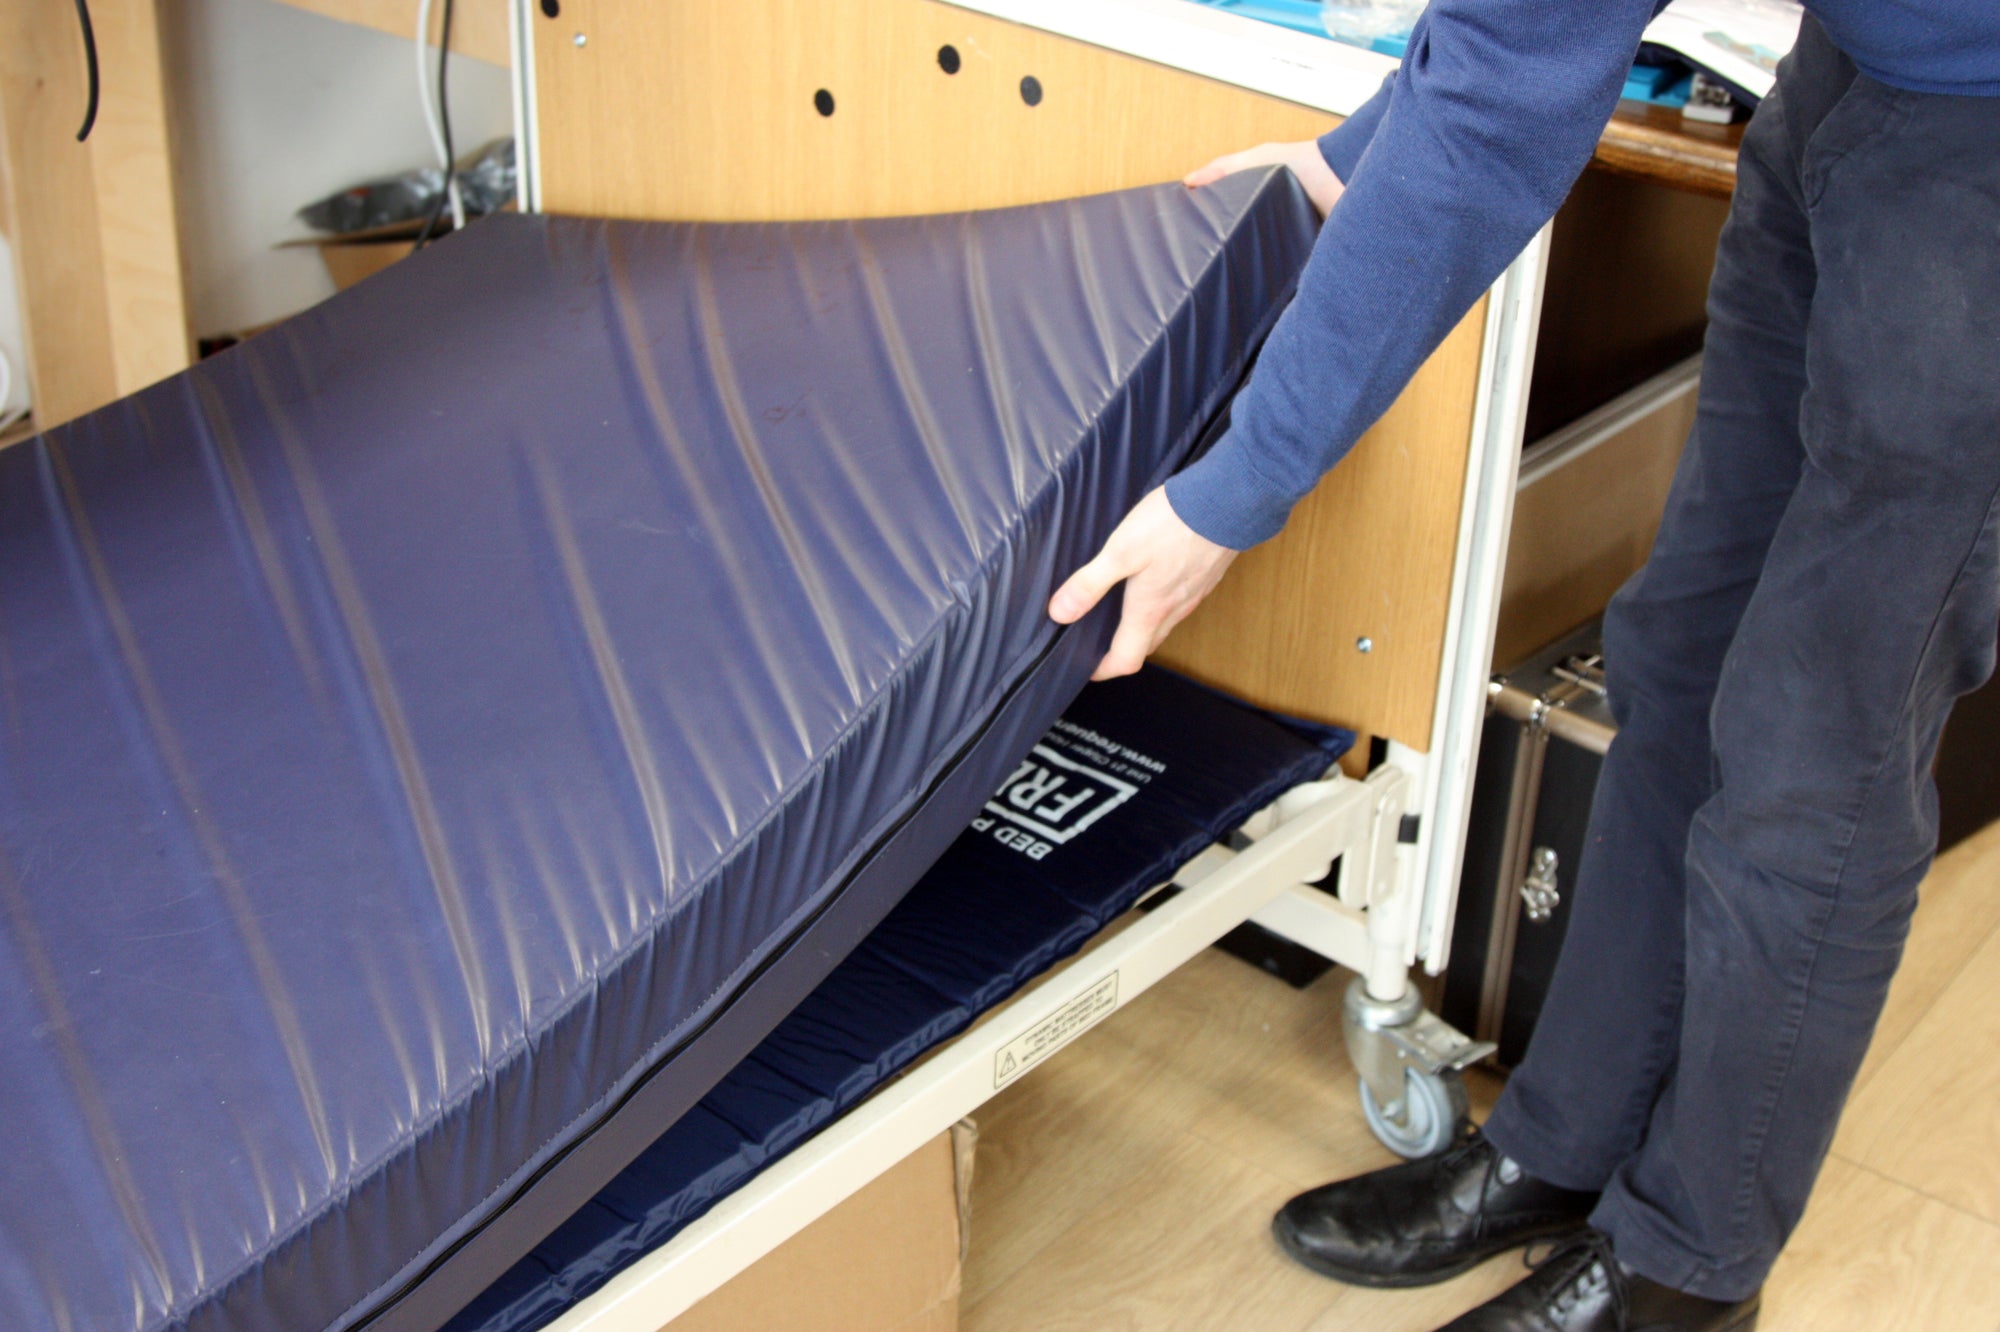 The Airlert bed leaving sensor for Nursecall Systems: A Practical Setup Guide